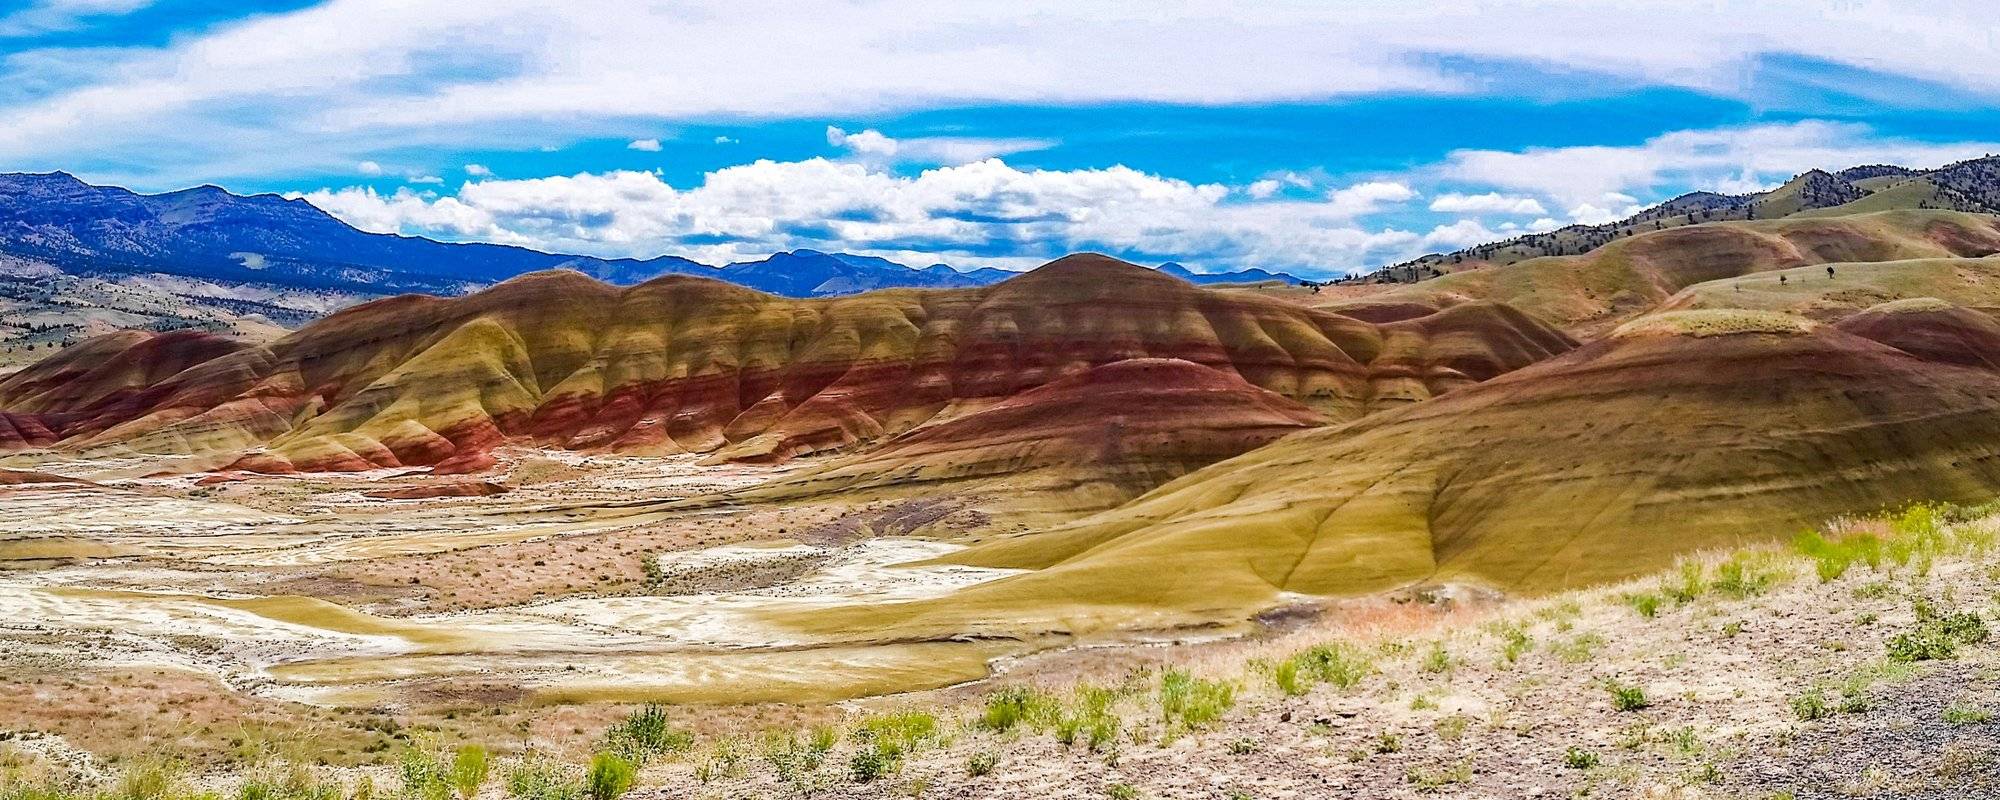 Painted Hills - Central Oregon